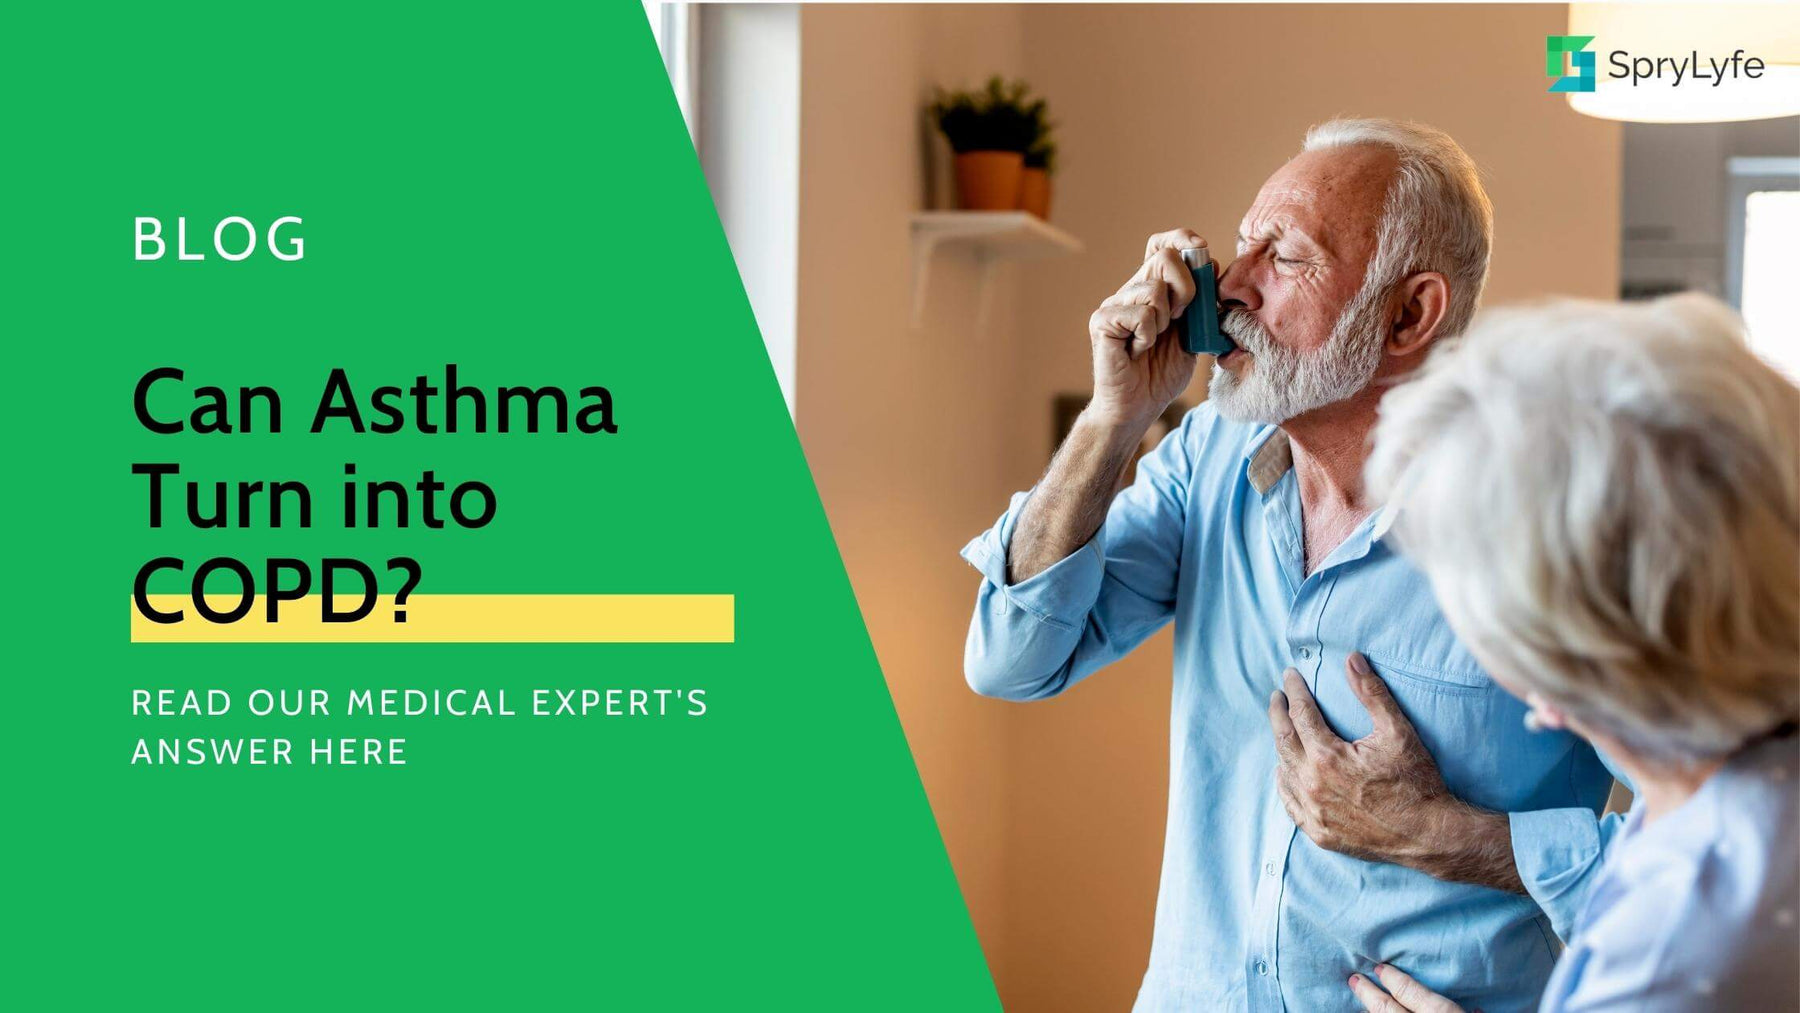 Can Asthma Turn into COPD? Here's What Medical Experts Say